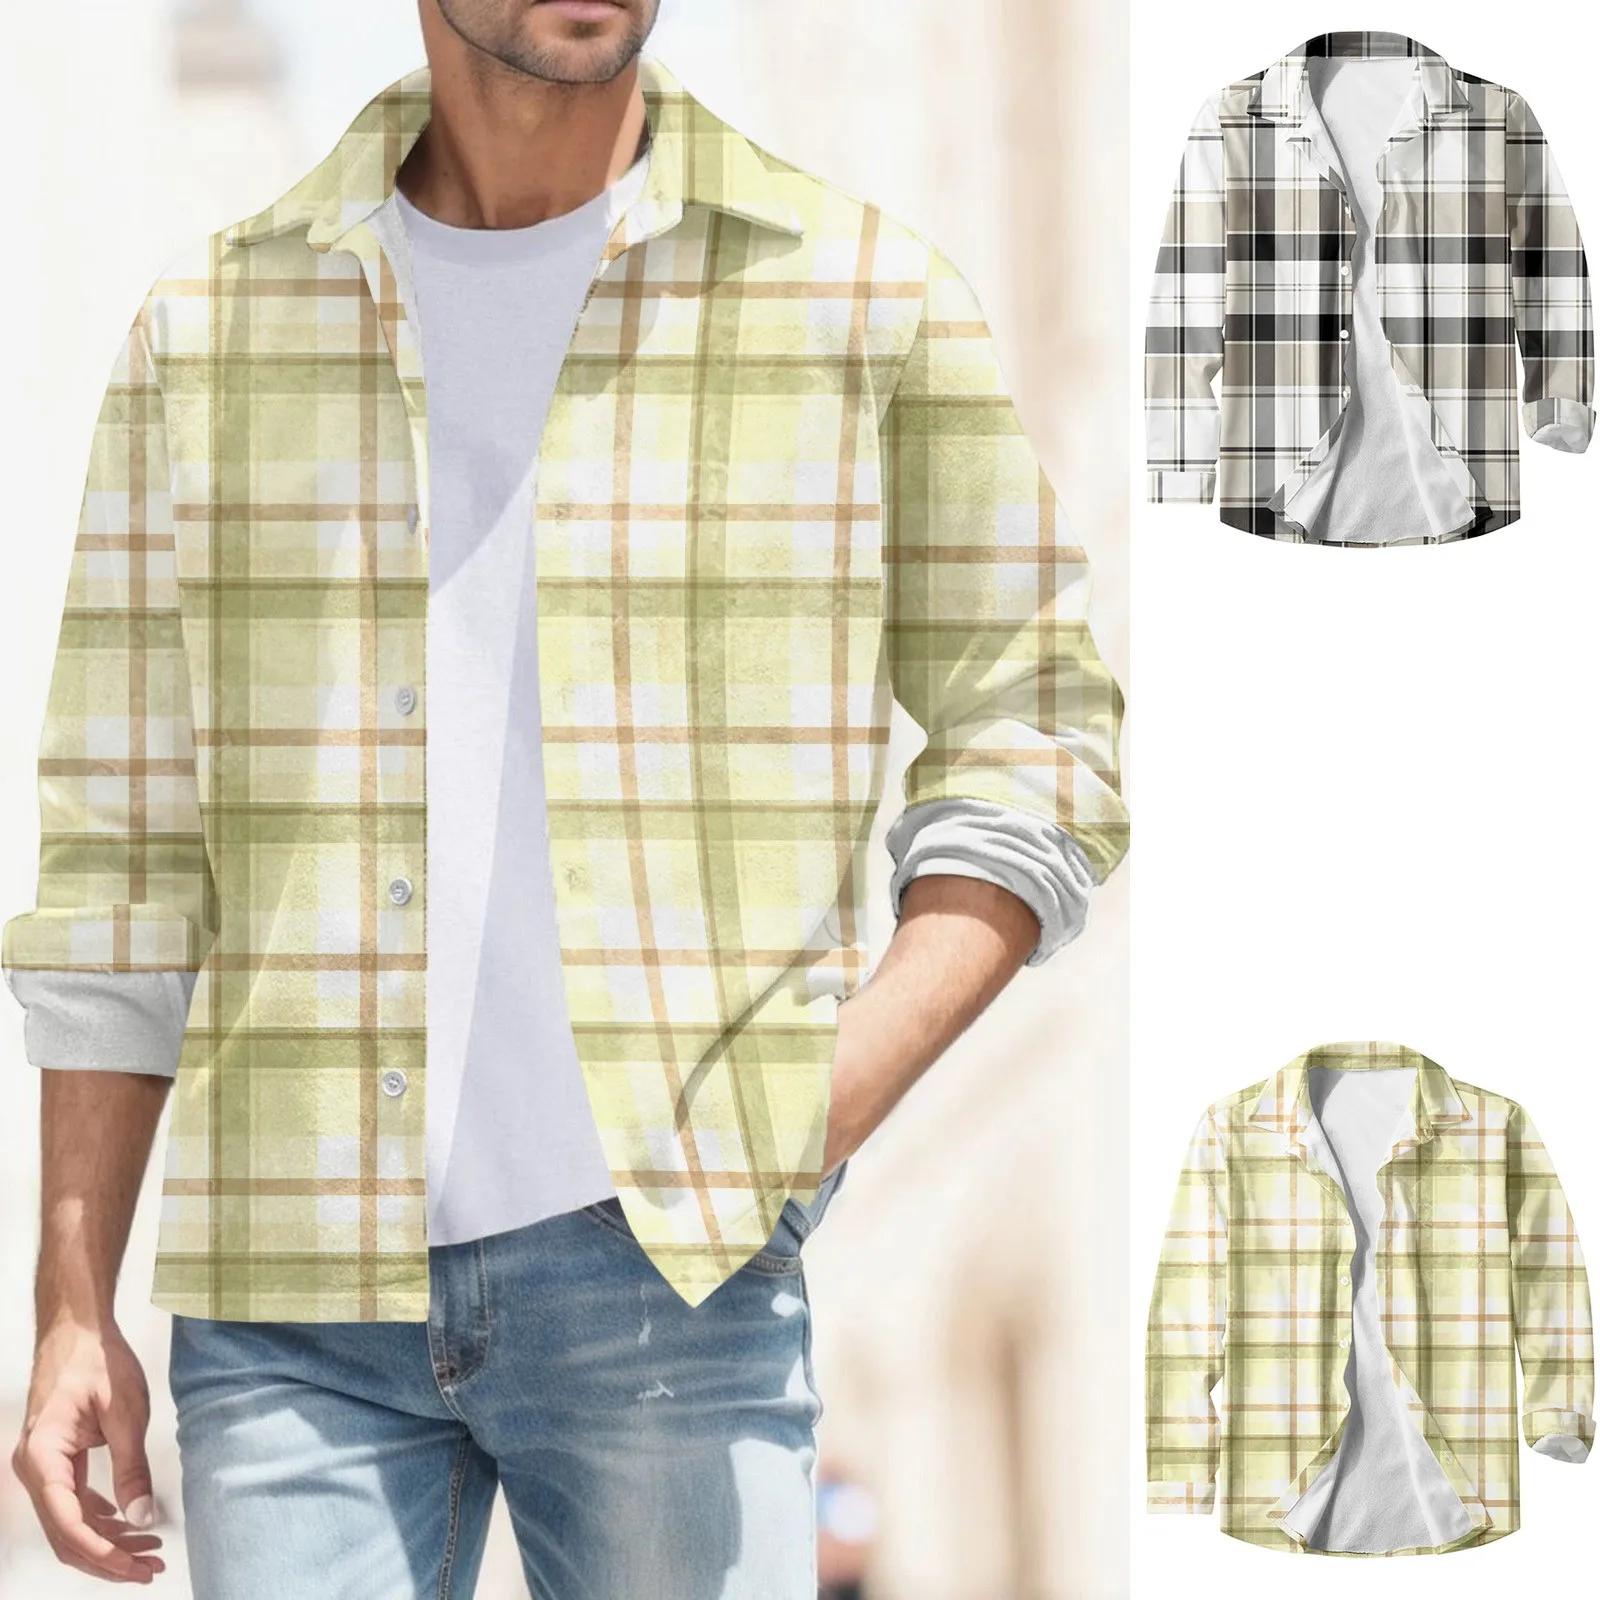 

Male Autumn And Winter Warm Fashion Casual Plaid Square Lapel Pocket No Hood Buckle Quilted Jacket Top Shirt Beach Handsome Men